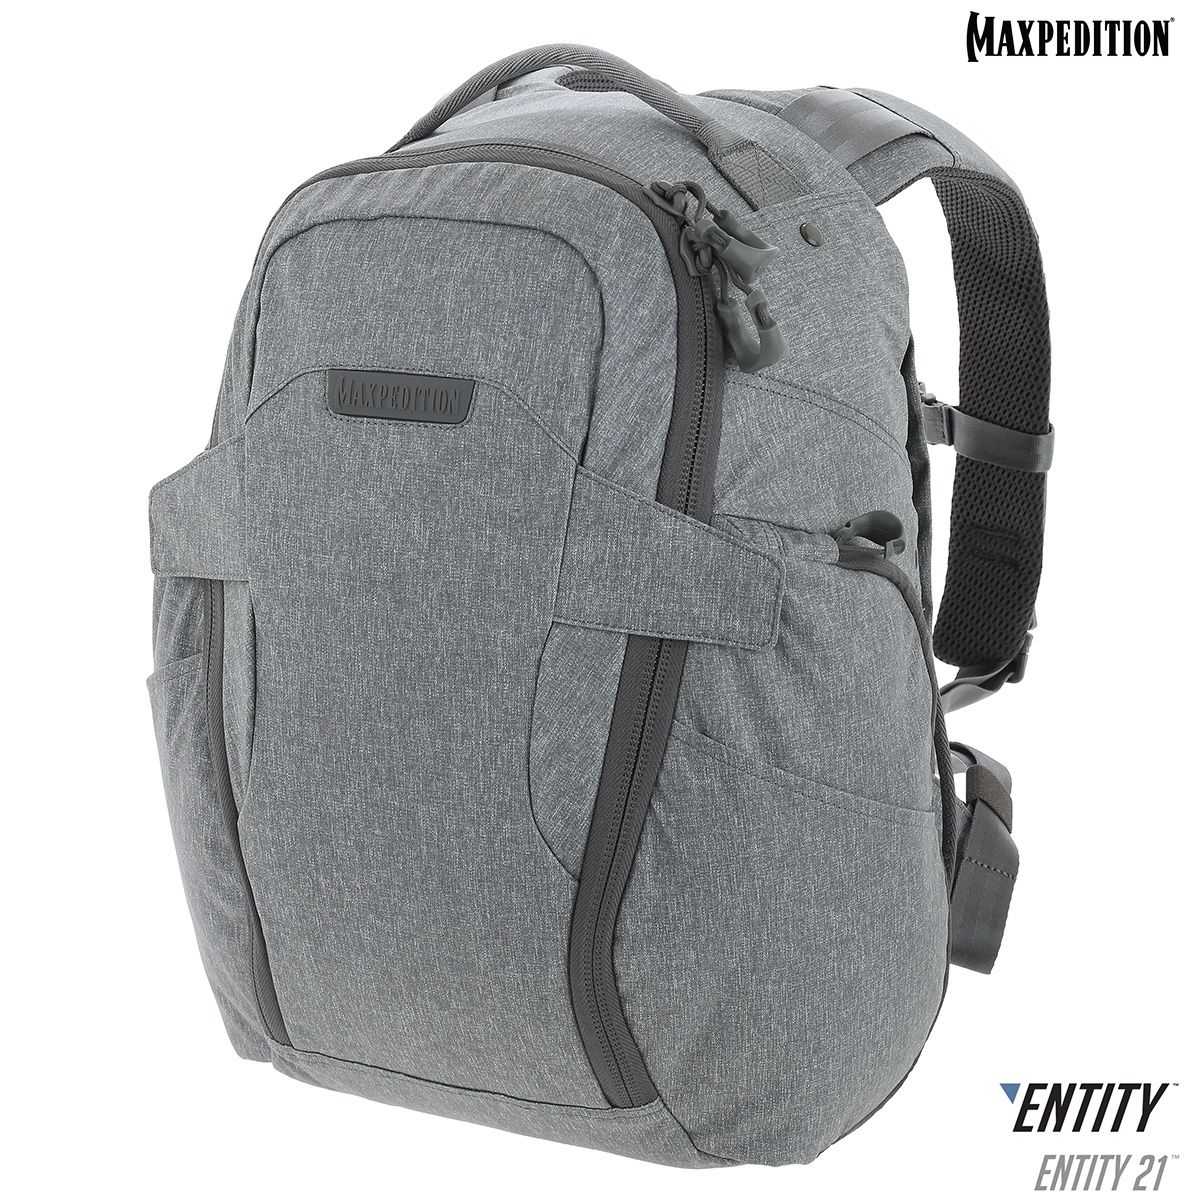 Maxpedition Entity 23 backpack